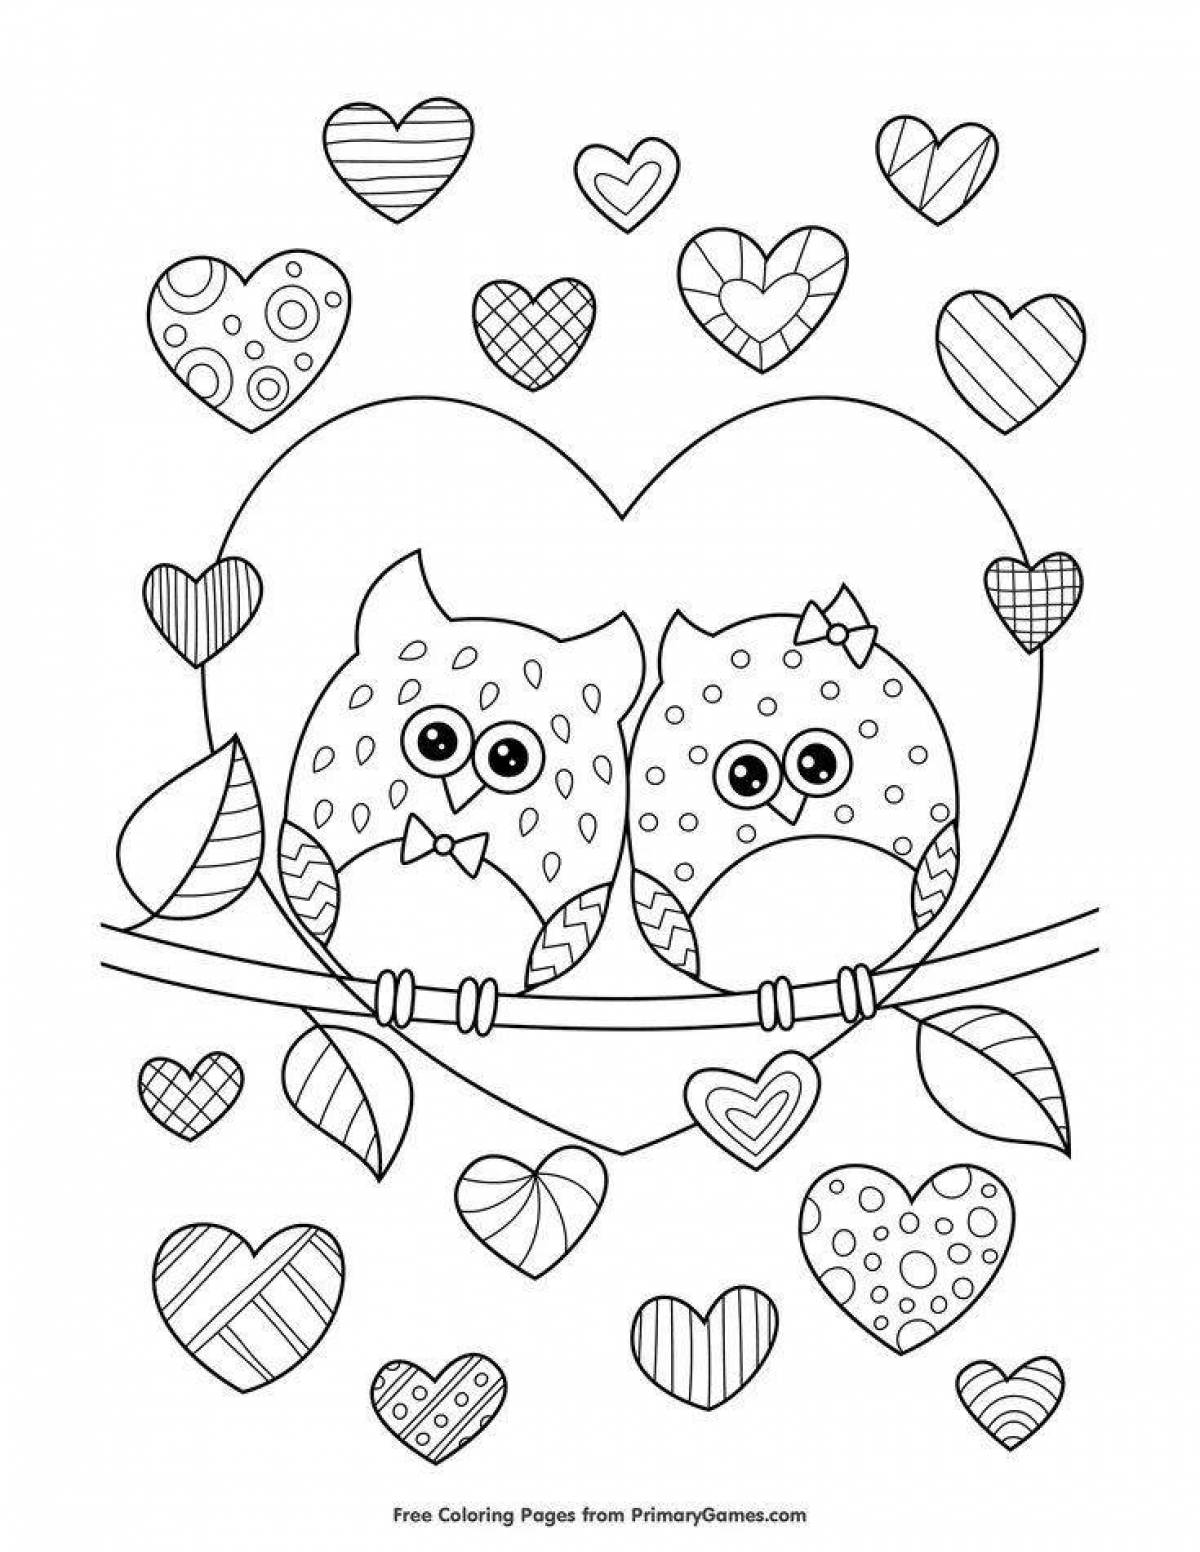 Fun coloring for valentine's day